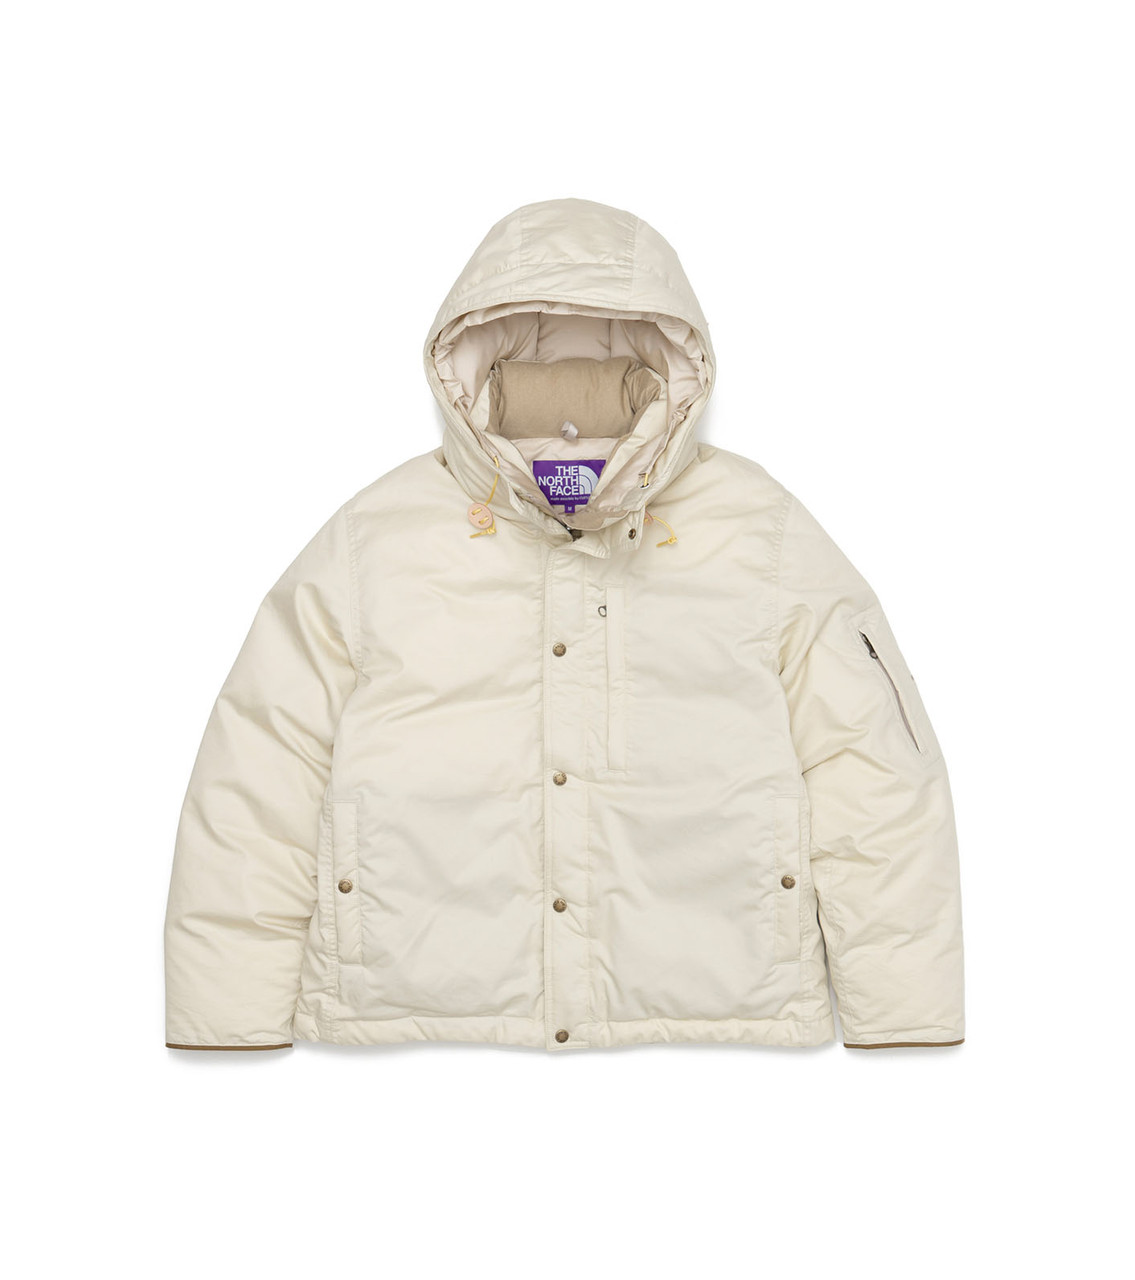 THE NORTH FACE PURPLE LABEL JACKET Lightweight Twill Mountain 